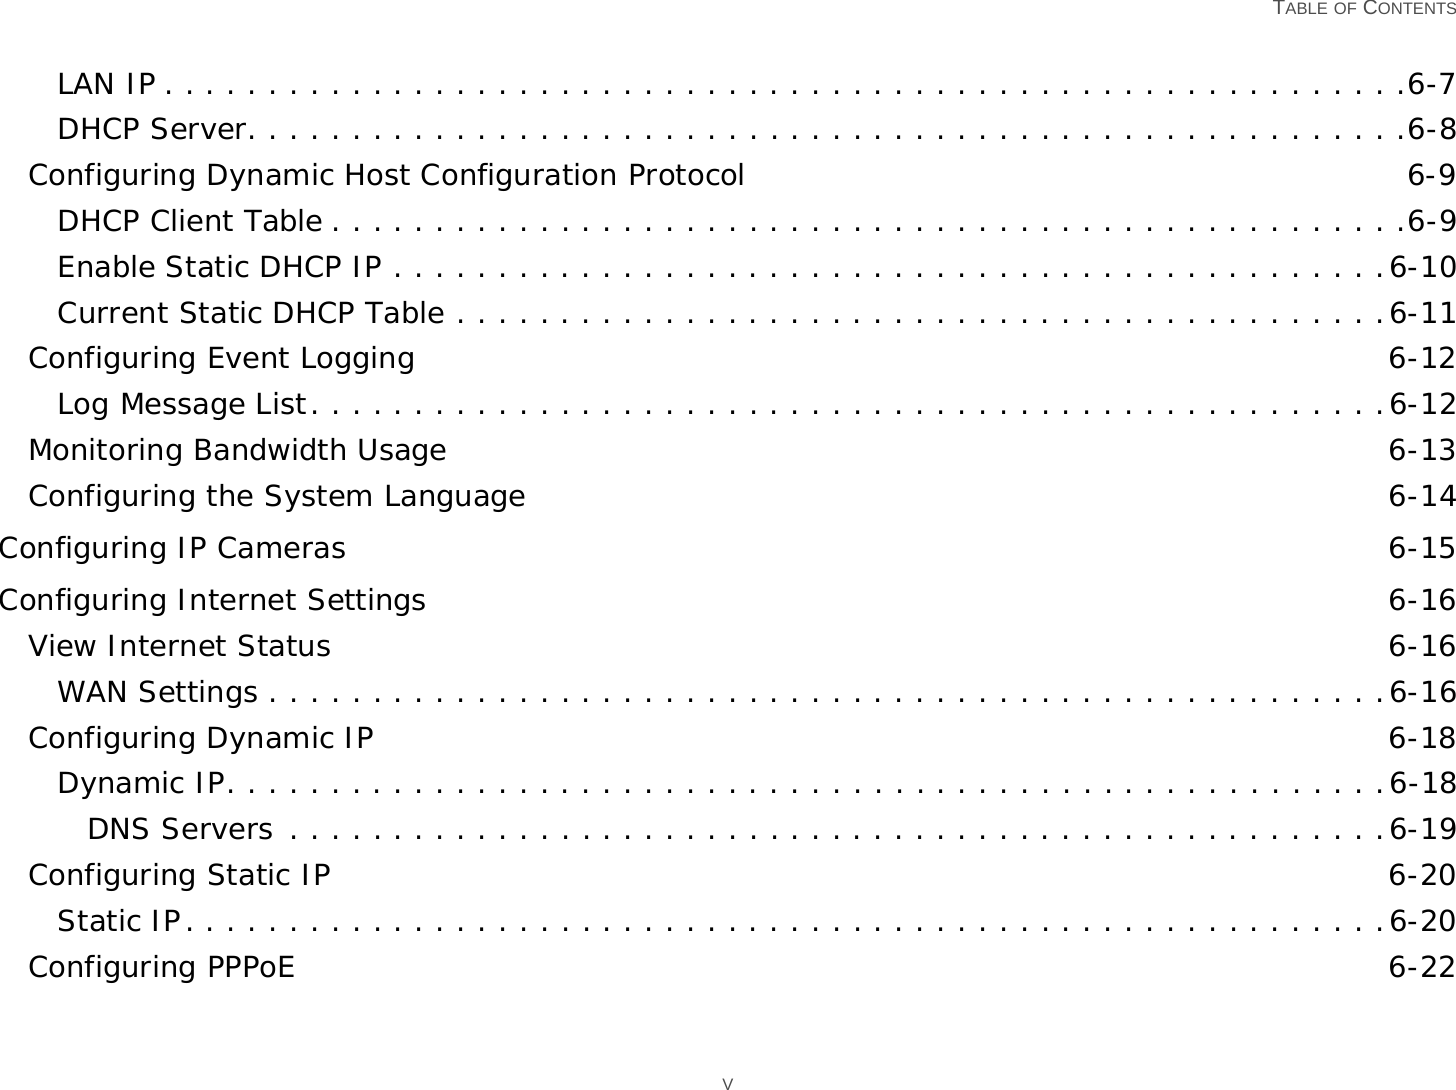   TABLE OF CONTENTS VLAN IP . . . . . . . . . . . . . . . . . . . . . . . . . . . . . . . . . . . . . . . . . . . . . . . . . . . . . . . . . . . .6-7DHCP Server. . . . . . . . . . . . . . . . . . . . . . . . . . . . . . . . . . . . . . . . . . . . . . . . . . . . . . . .6-8Configuring Dynamic Host Configuration Protocol 6-9DHCP Client Table . . . . . . . . . . . . . . . . . . . . . . . . . . . . . . . . . . . . . . . . . . . . . . . . . . . .6-9Enable Static DHCP IP . . . . . . . . . . . . . . . . . . . . . . . . . . . . . . . . . . . . . . . . . . . . . . . .6-10Current Static DHCP Table . . . . . . . . . . . . . . . . . . . . . . . . . . . . . . . . . . . . . . . . . . . . .6-11Configuring Event Logging 6-12Log Message List. . . . . . . . . . . . . . . . . . . . . . . . . . . . . . . . . . . . . . . . . . . . . . . . . . . .6-12Monitoring Bandwidth Usage 6-13Configuring the System Language 6-14Configuring IP Cameras 6-15Configuring Internet Settings 6-16View Internet Status 6-16WAN Settings . . . . . . . . . . . . . . . . . . . . . . . . . . . . . . . . . . . . . . . . . . . . . . . . . . . . . .6-16Configuring Dynamic IP 6-18Dynamic IP. . . . . . . . . . . . . . . . . . . . . . . . . . . . . . . . . . . . . . . . . . . . . . . . . . . . . . . .6-18DNS Servers . . . . . . . . . . . . . . . . . . . . . . . . . . . . . . . . . . . . . . . . . . . . . . . . . . . . .6-19Configuring Static IP 6-20Static IP. . . . . . . . . . . . . . . . . . . . . . . . . . . . . . . . . . . . . . . . . . . . . . . . . . . . . . . . . .6-20Configuring PPPoE 6-22